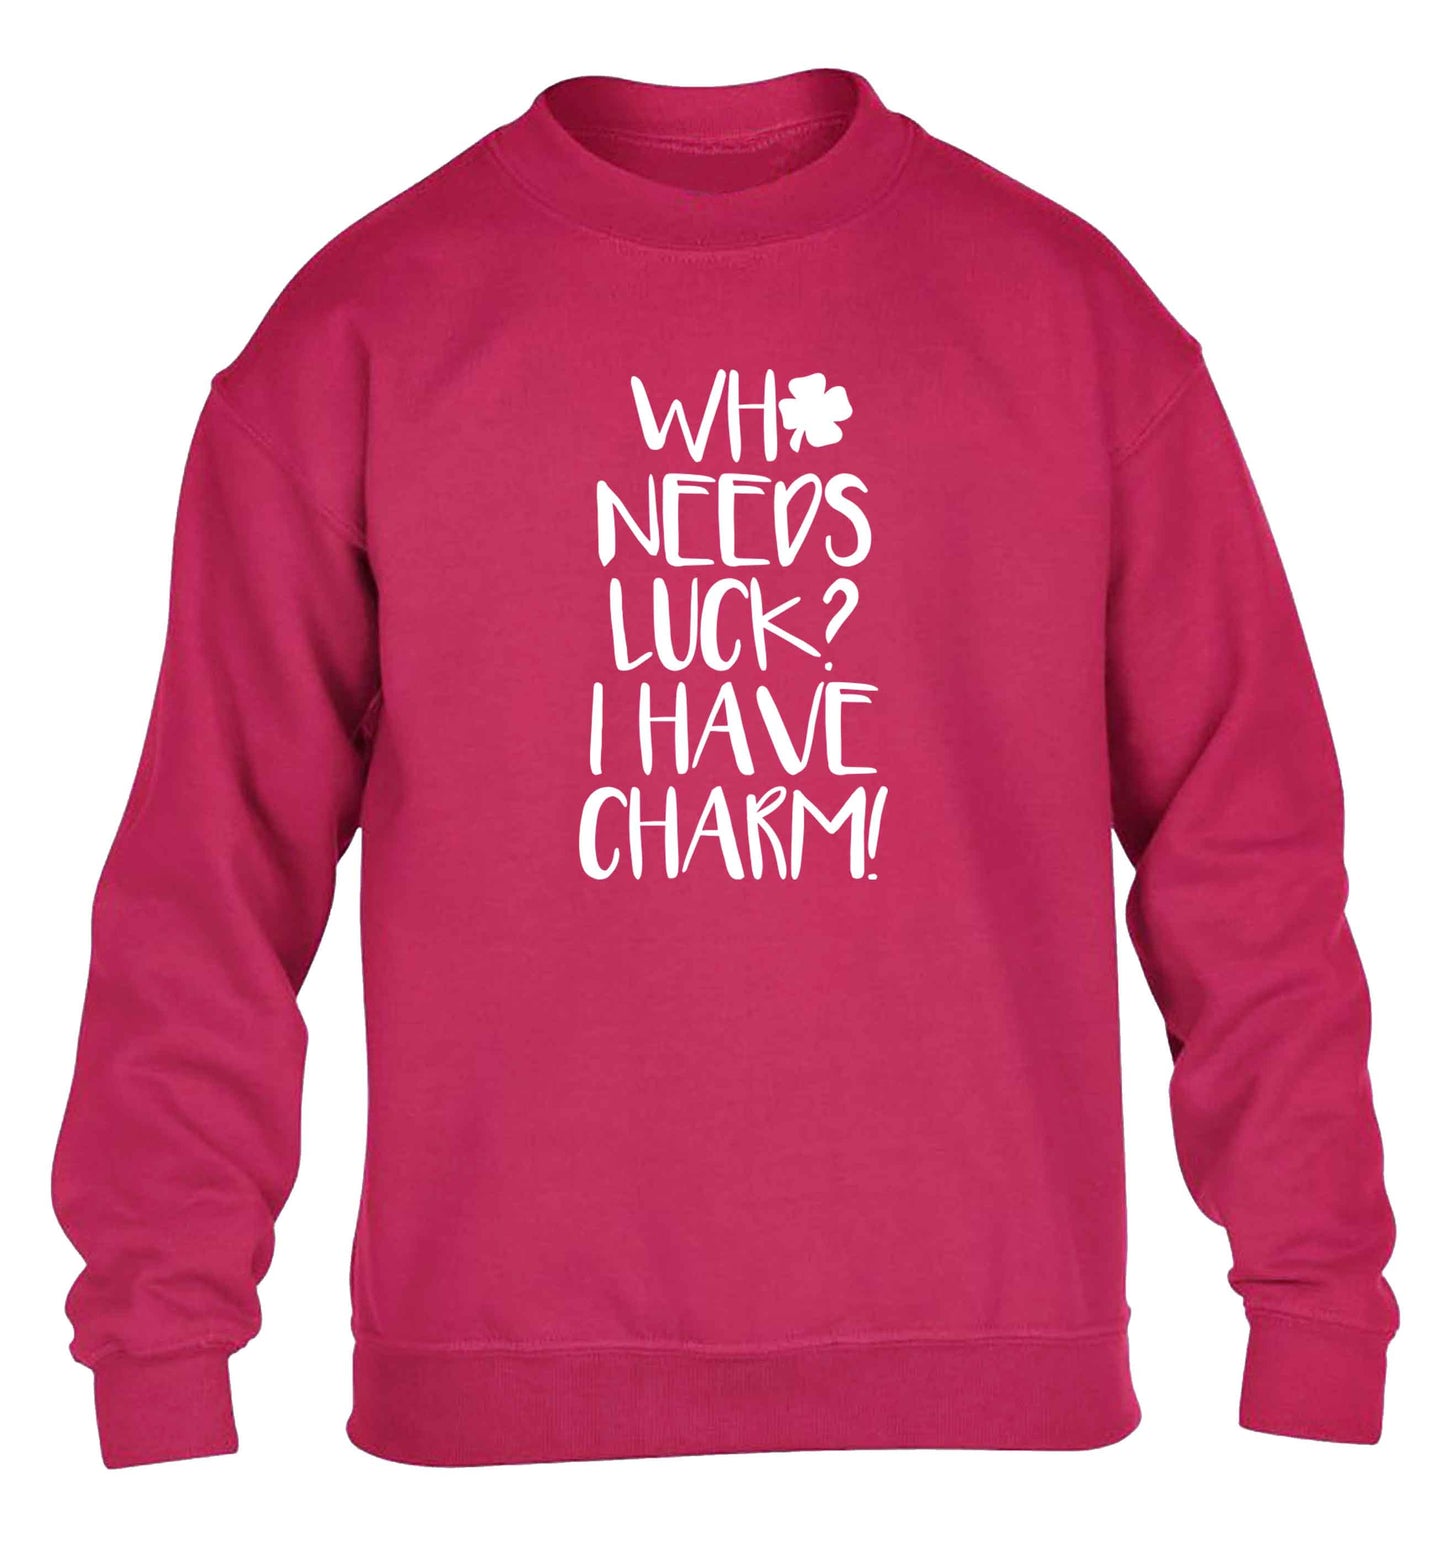 Who needs luck? I have charm! children's pink sweater 12-13 Years